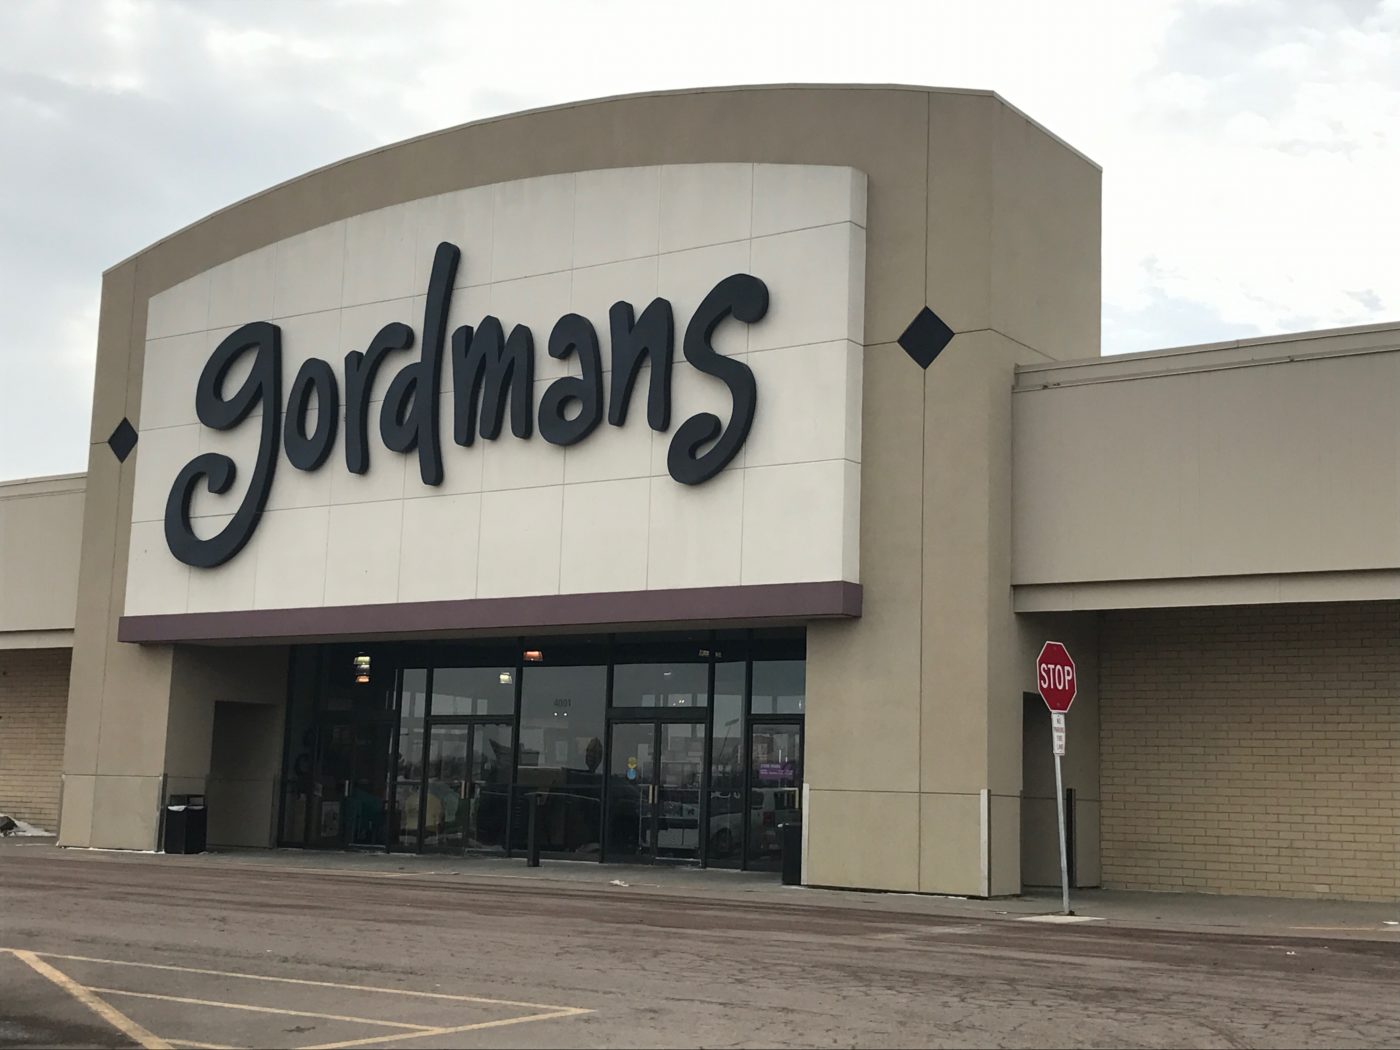 Image of Fordmans store